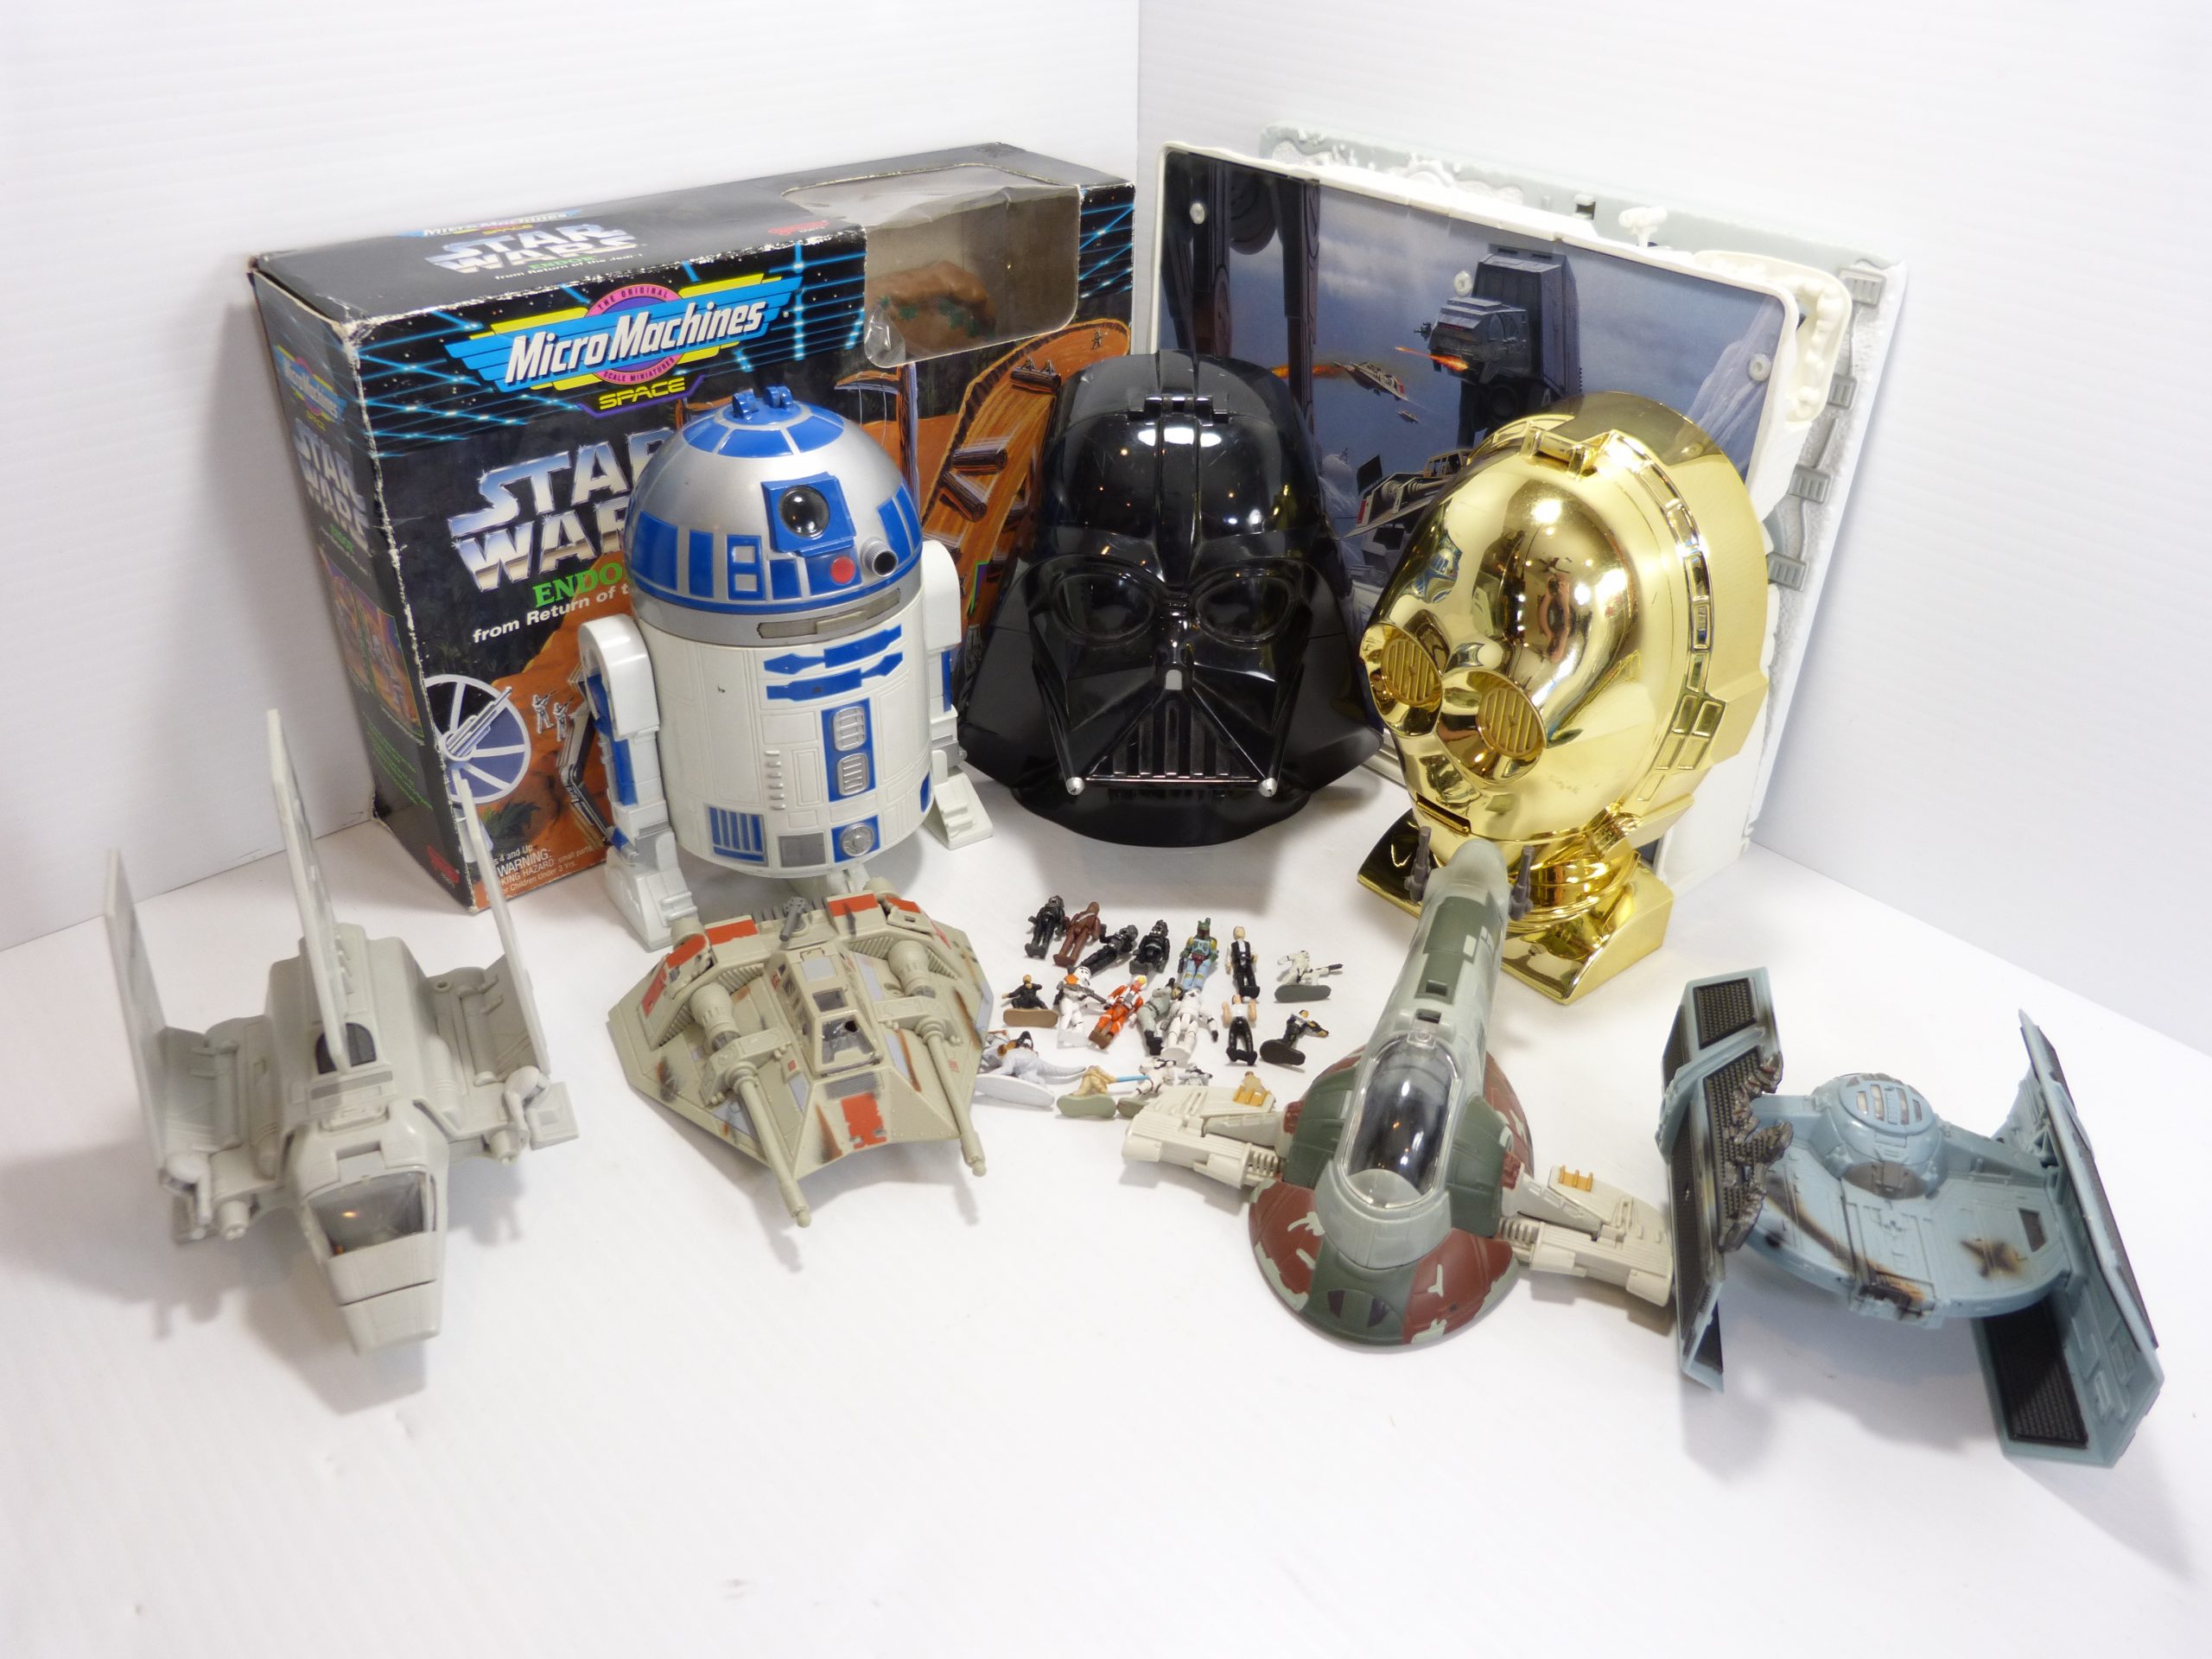 Star Wars Action Fleet Micro Machines Lot Ice Planet Hoth - The Death Star - Rebel Base + Lots More